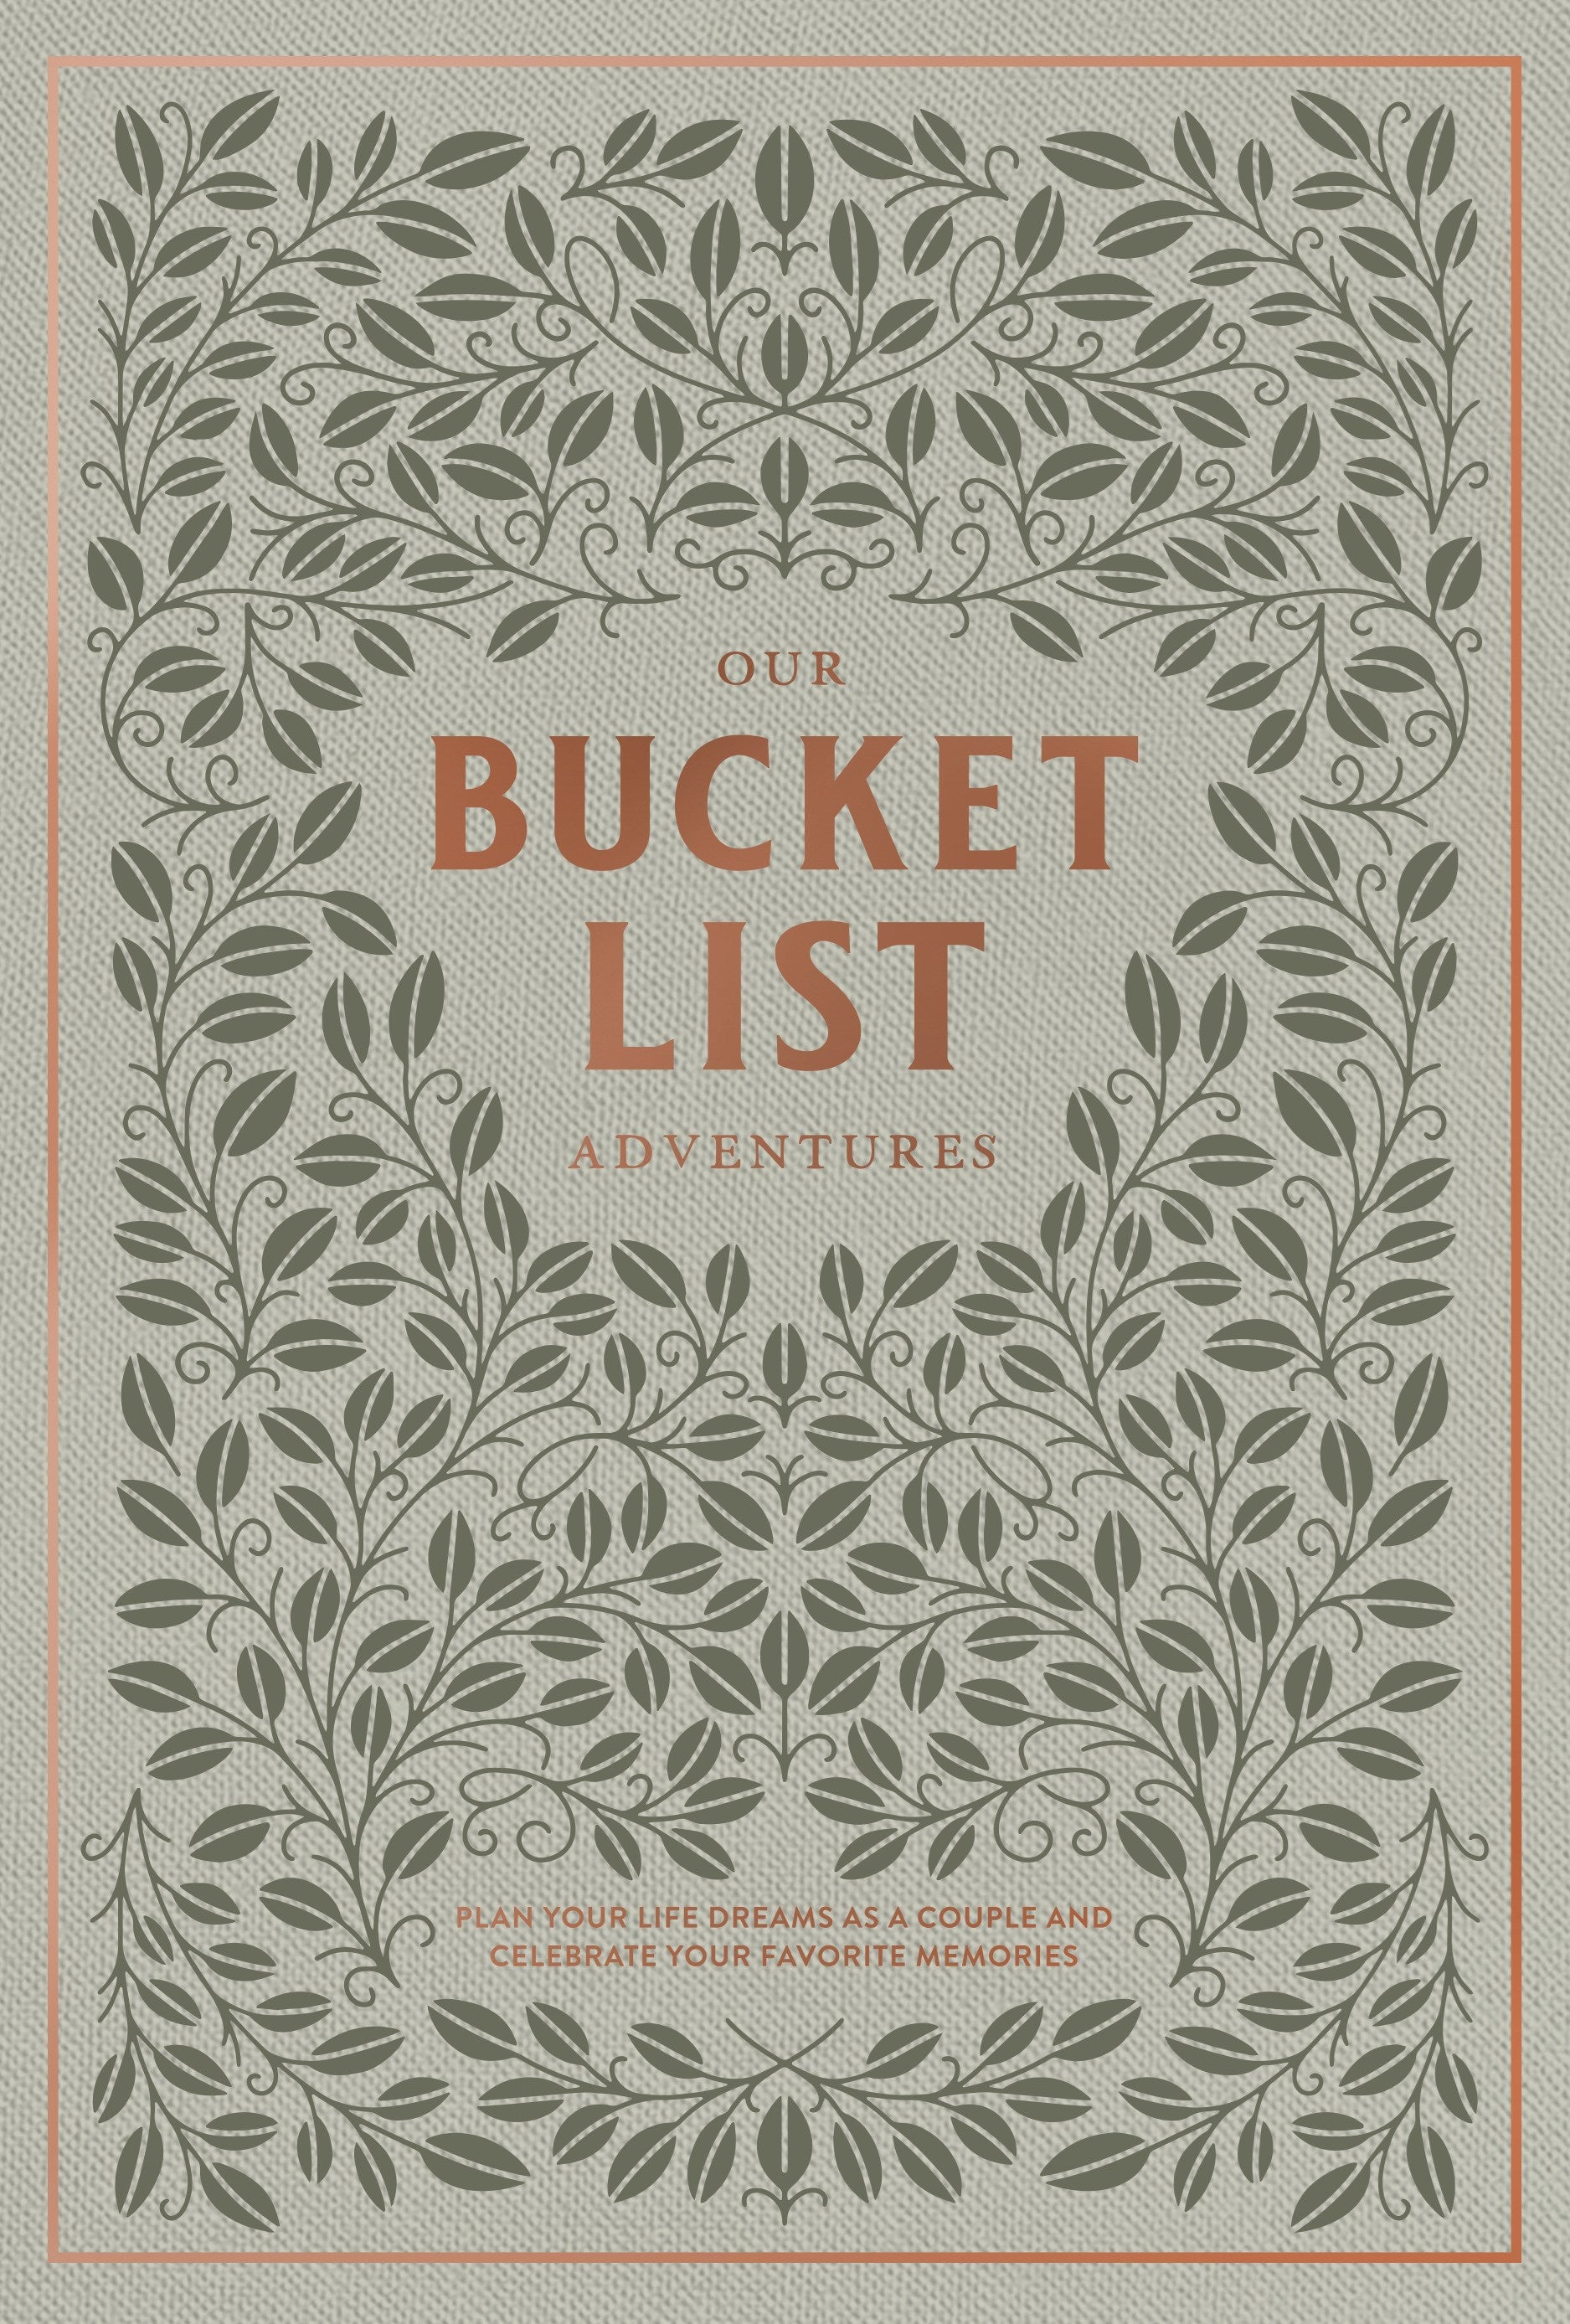 Our Bucket List Adventures: Plan Your Life Dreams as a Couple and Celebrate Your Favorite Memories